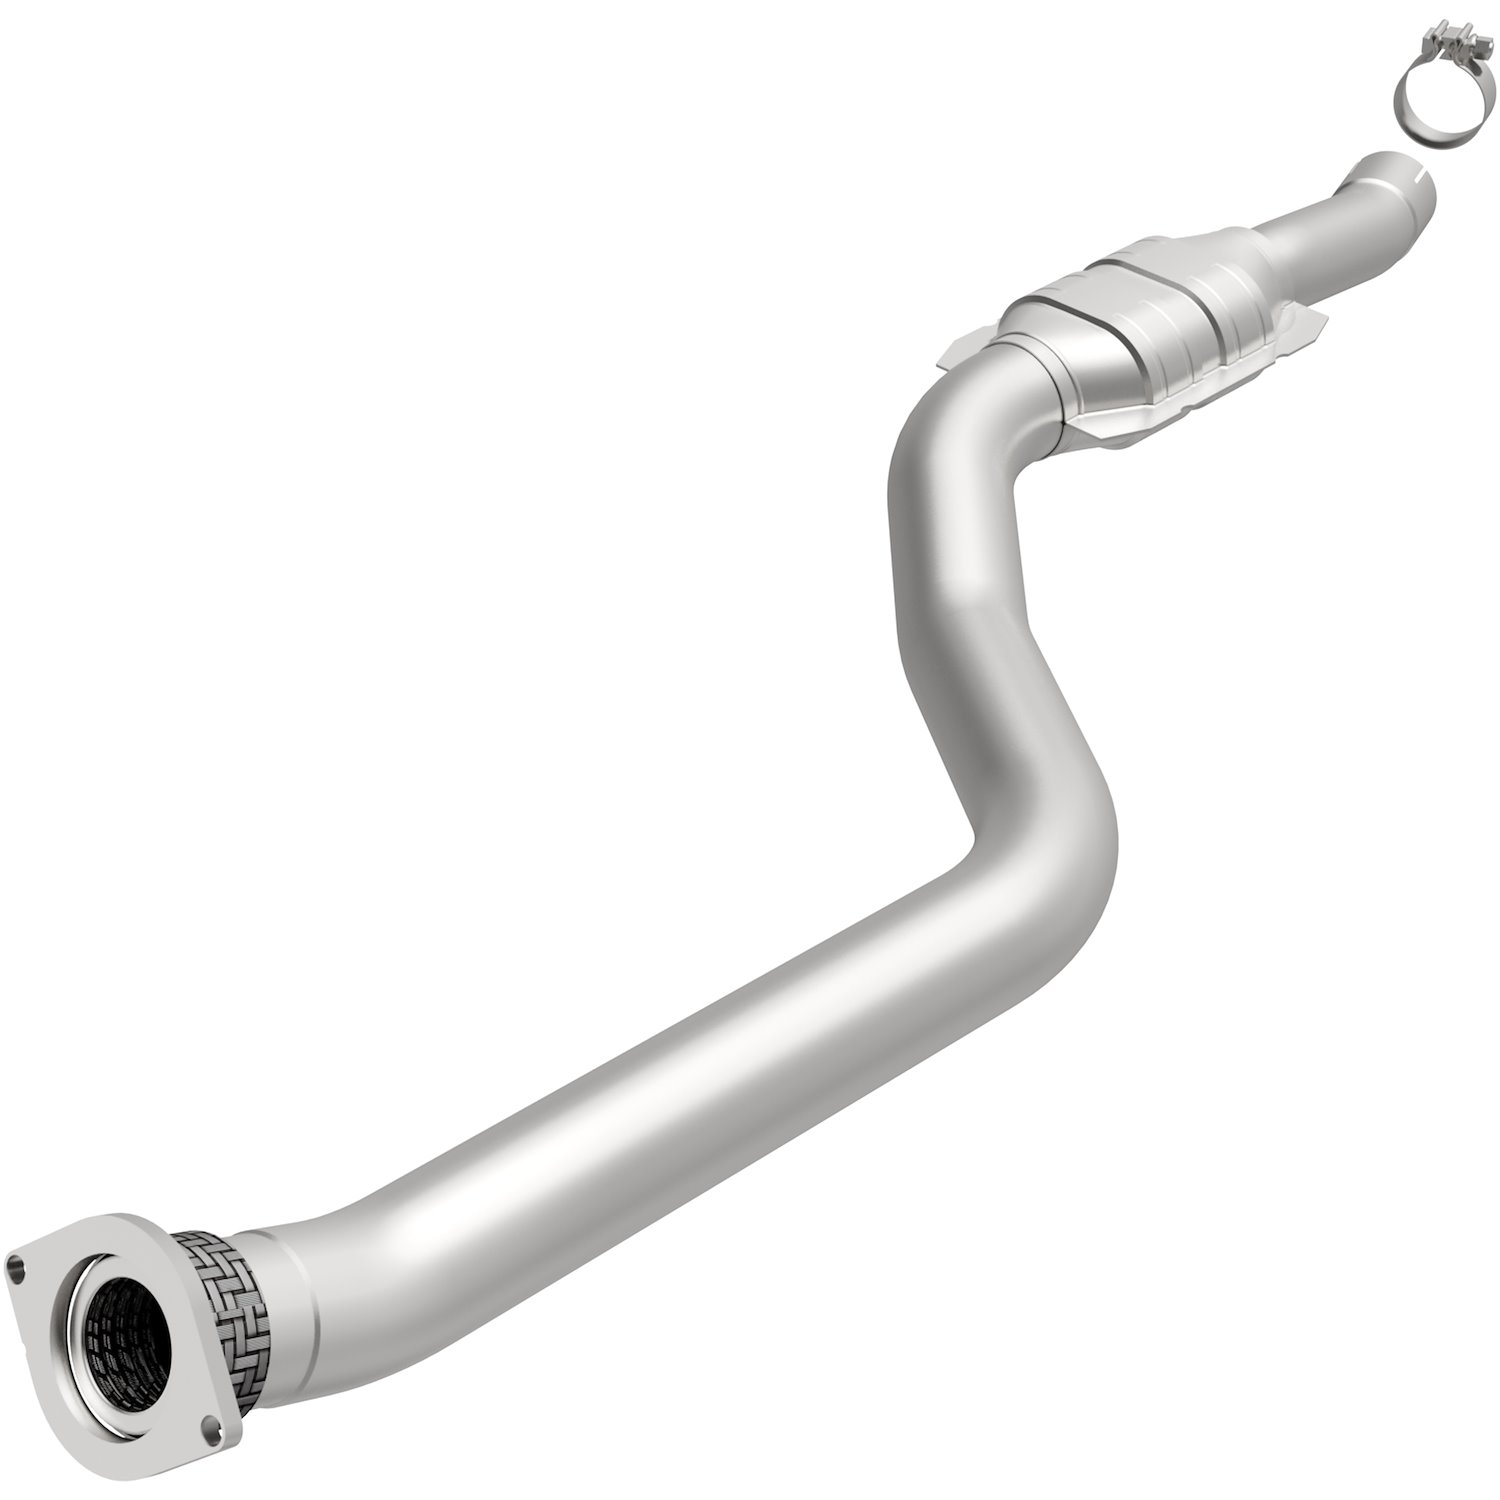 2013-2015 Cadillac ATS OEM Grade Federal / EPA Compliant Direct-Fit Catalytic Converter